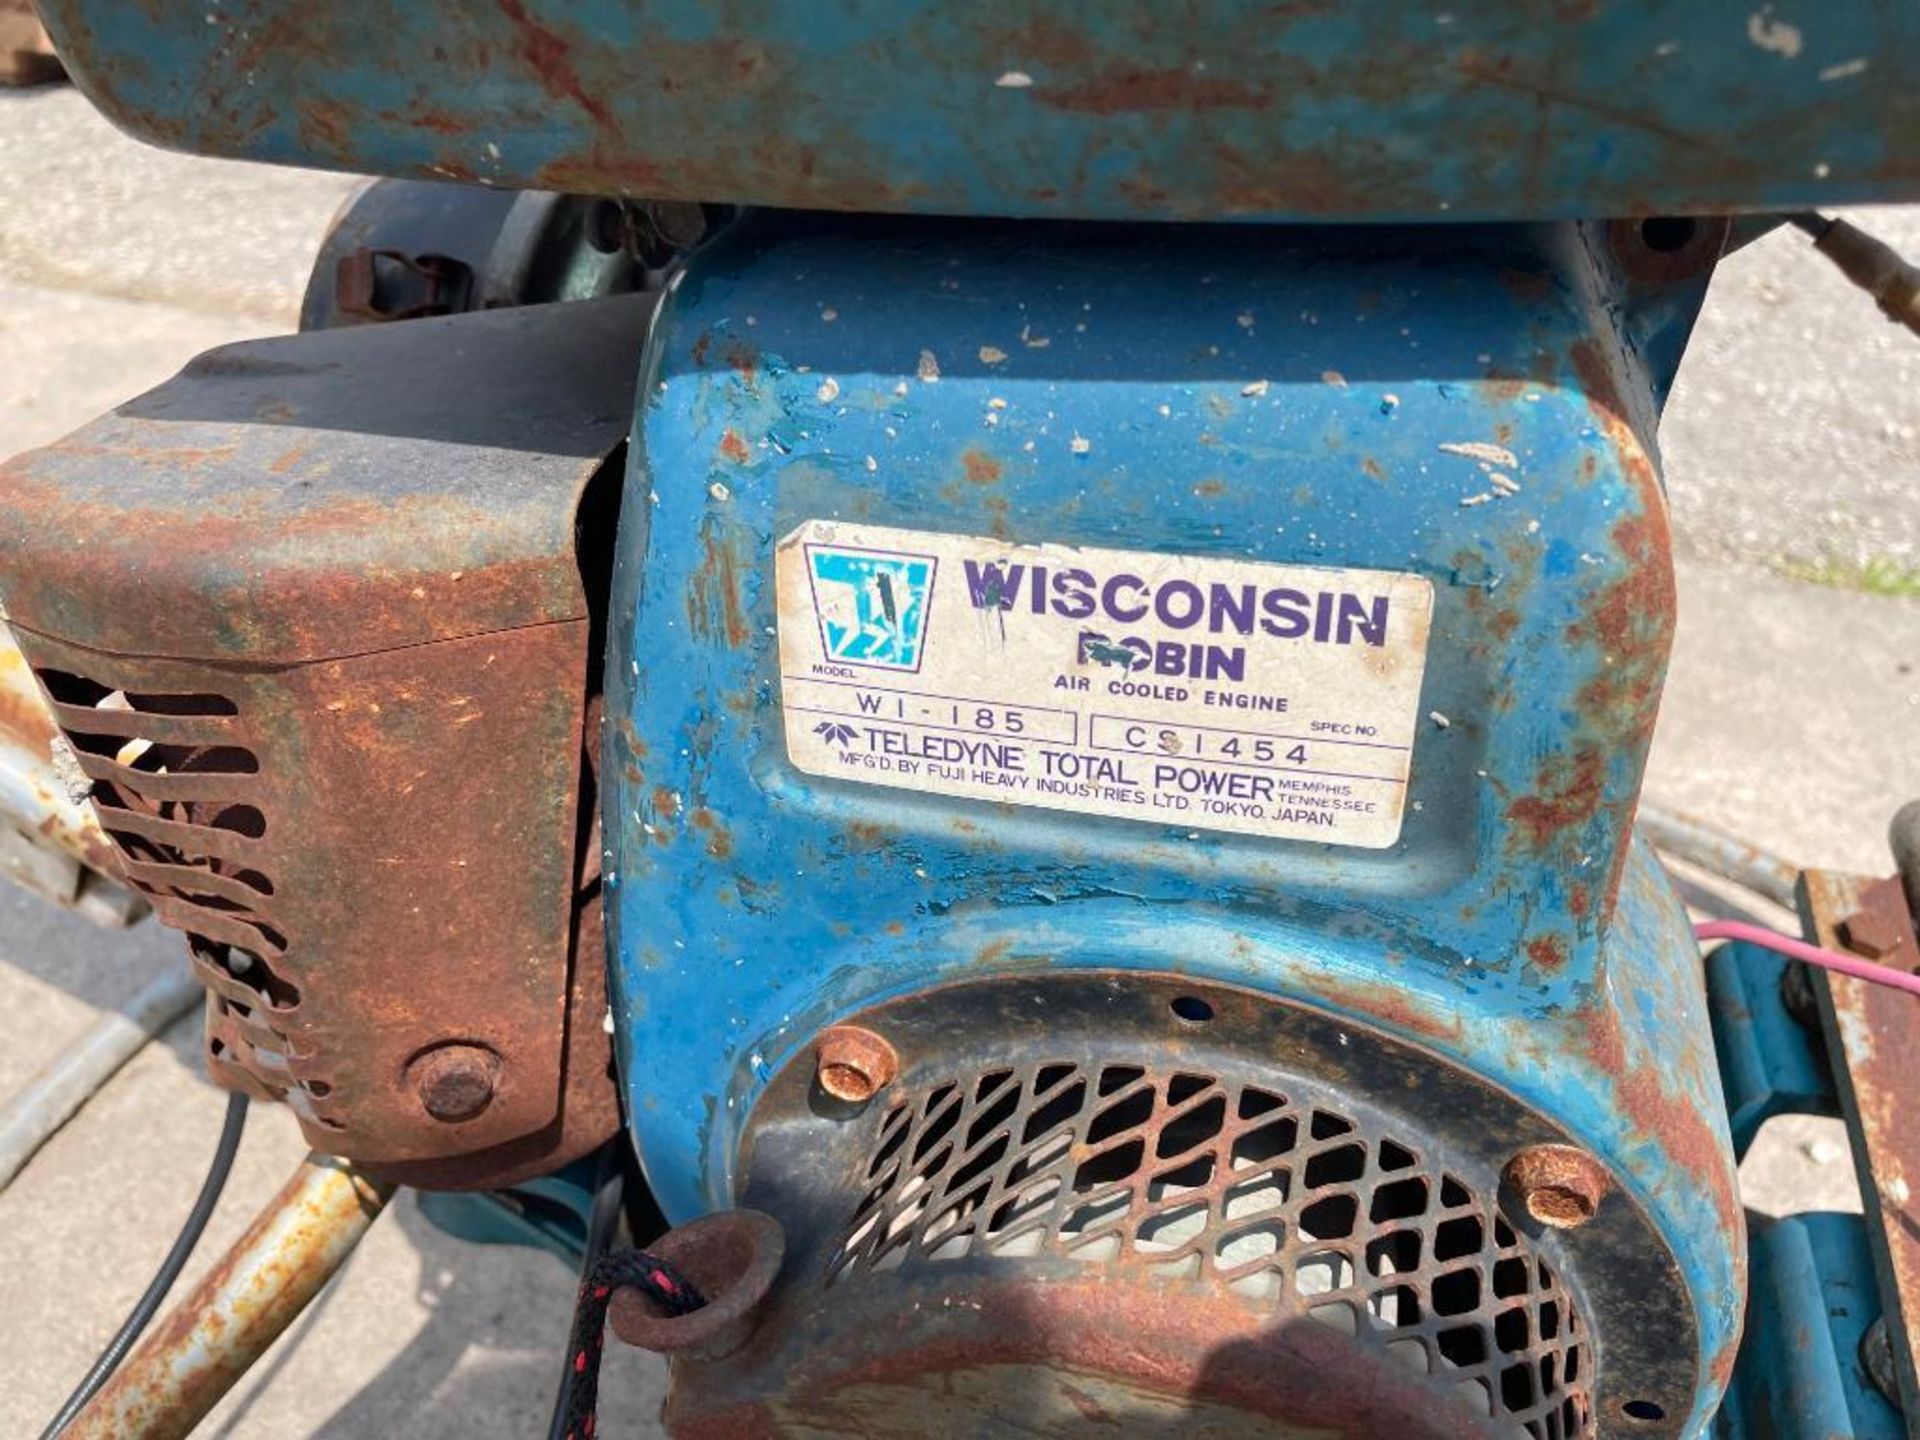 (2) 36" Bartell Power Trowels with Wisconsin Robin Engines for PARTS. Located in Glen Ellyn, IL. - Image 8 of 8